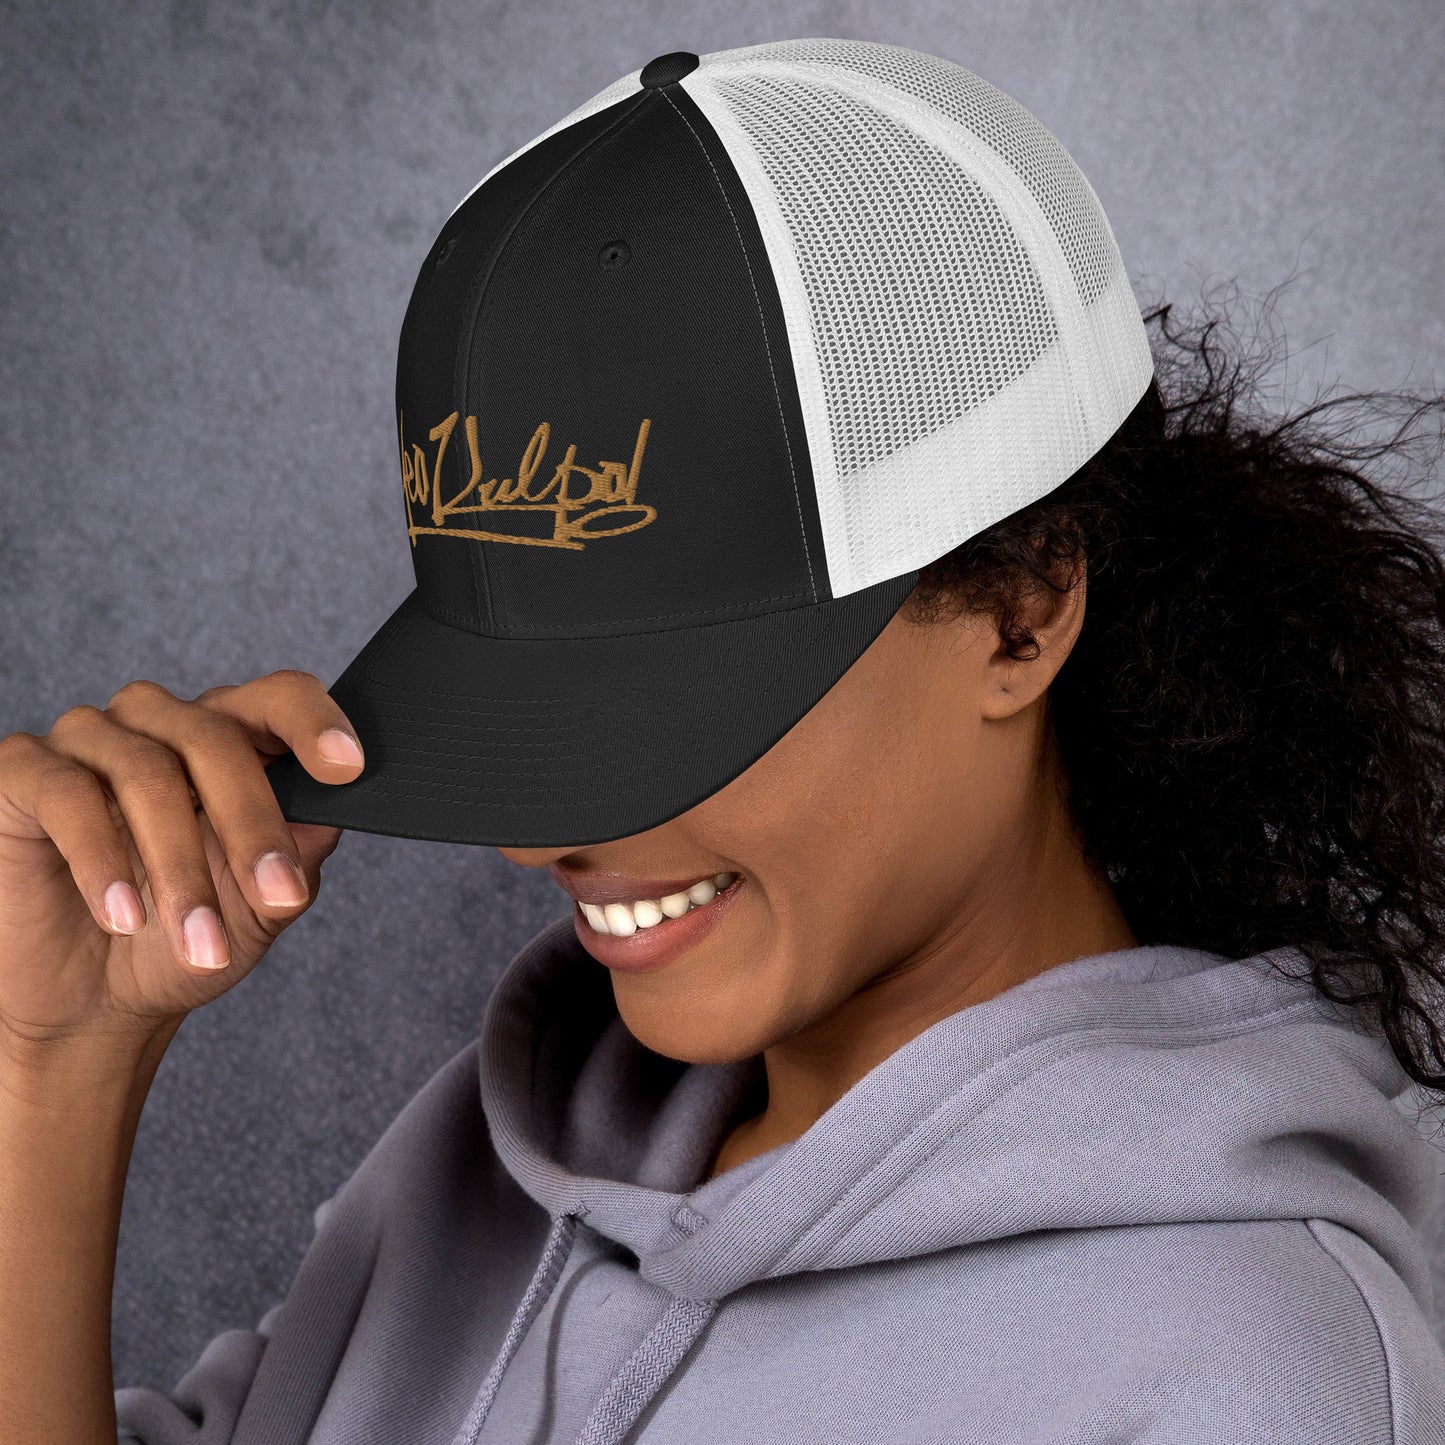 Side Angle of the MeaKulpa Trucker Cap in Black and White - Explore the sleek profile of the MeaKulpa Trucker Cap. The gold emblem glistens against the black front, while the white mesh back adds a touch of contrast. It's the perfect blend of modern sophistication and vintage charm.